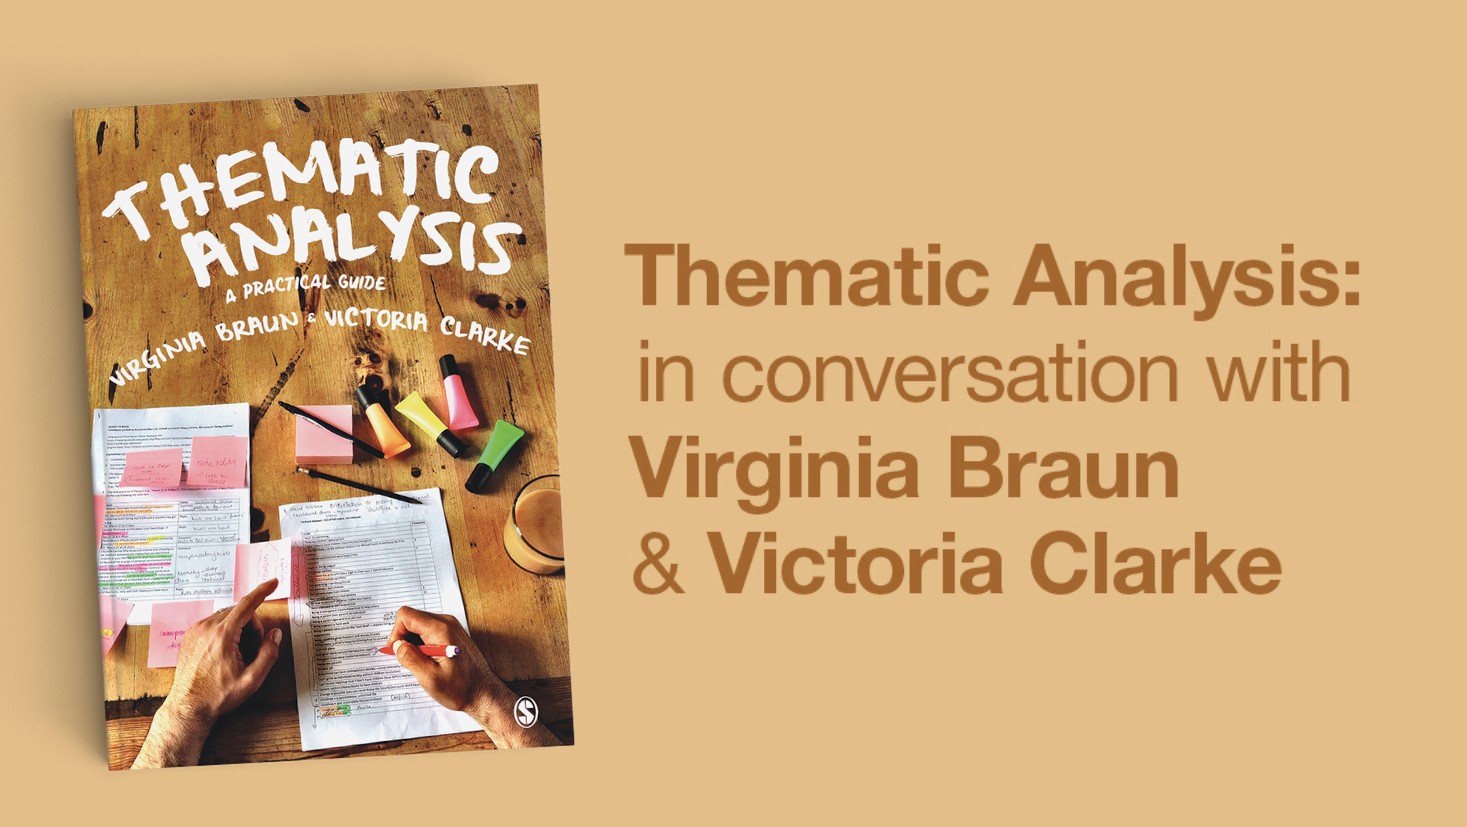 Thematic Analysis: in conversation with Virginia Braun and Victoria Clarke